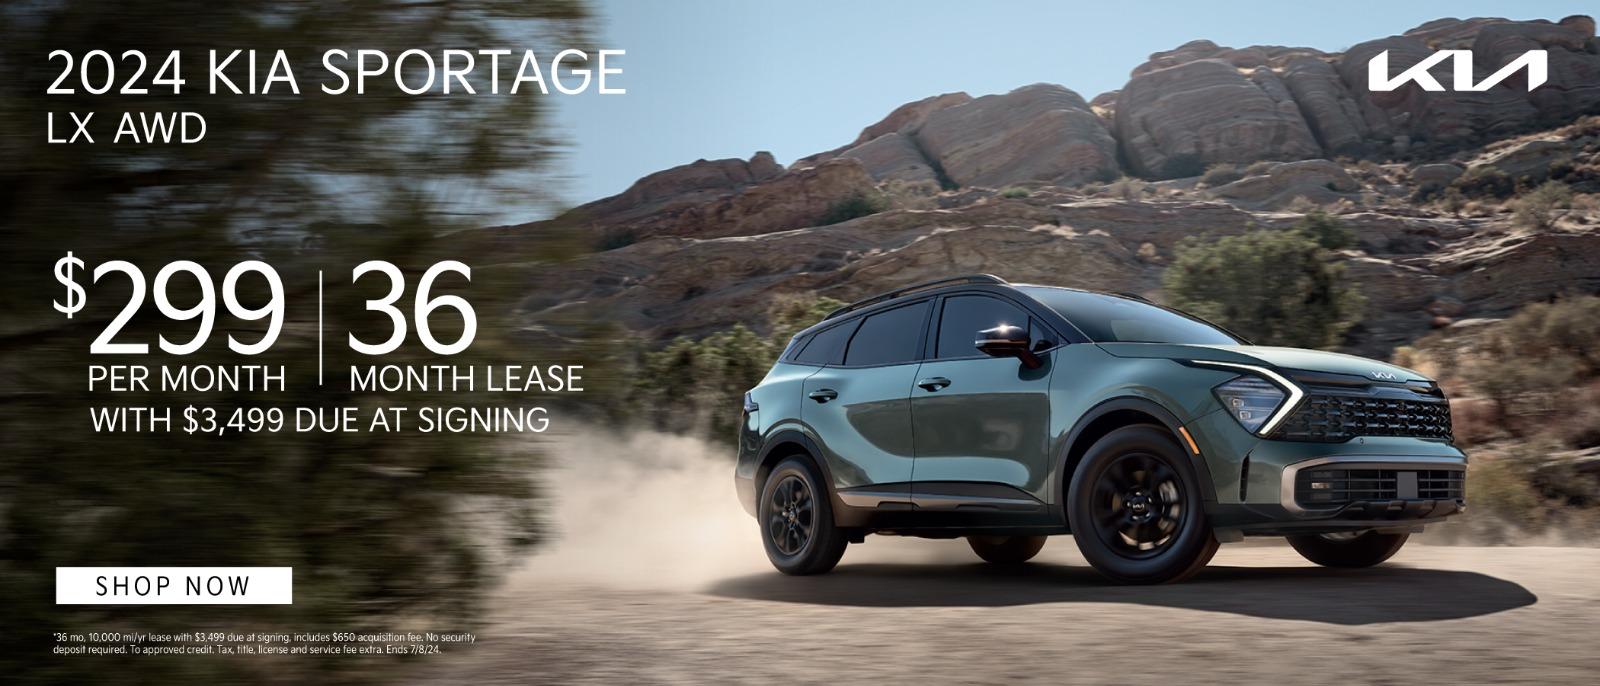 2024 Kia Sportage lease for $299 per month for 36 months